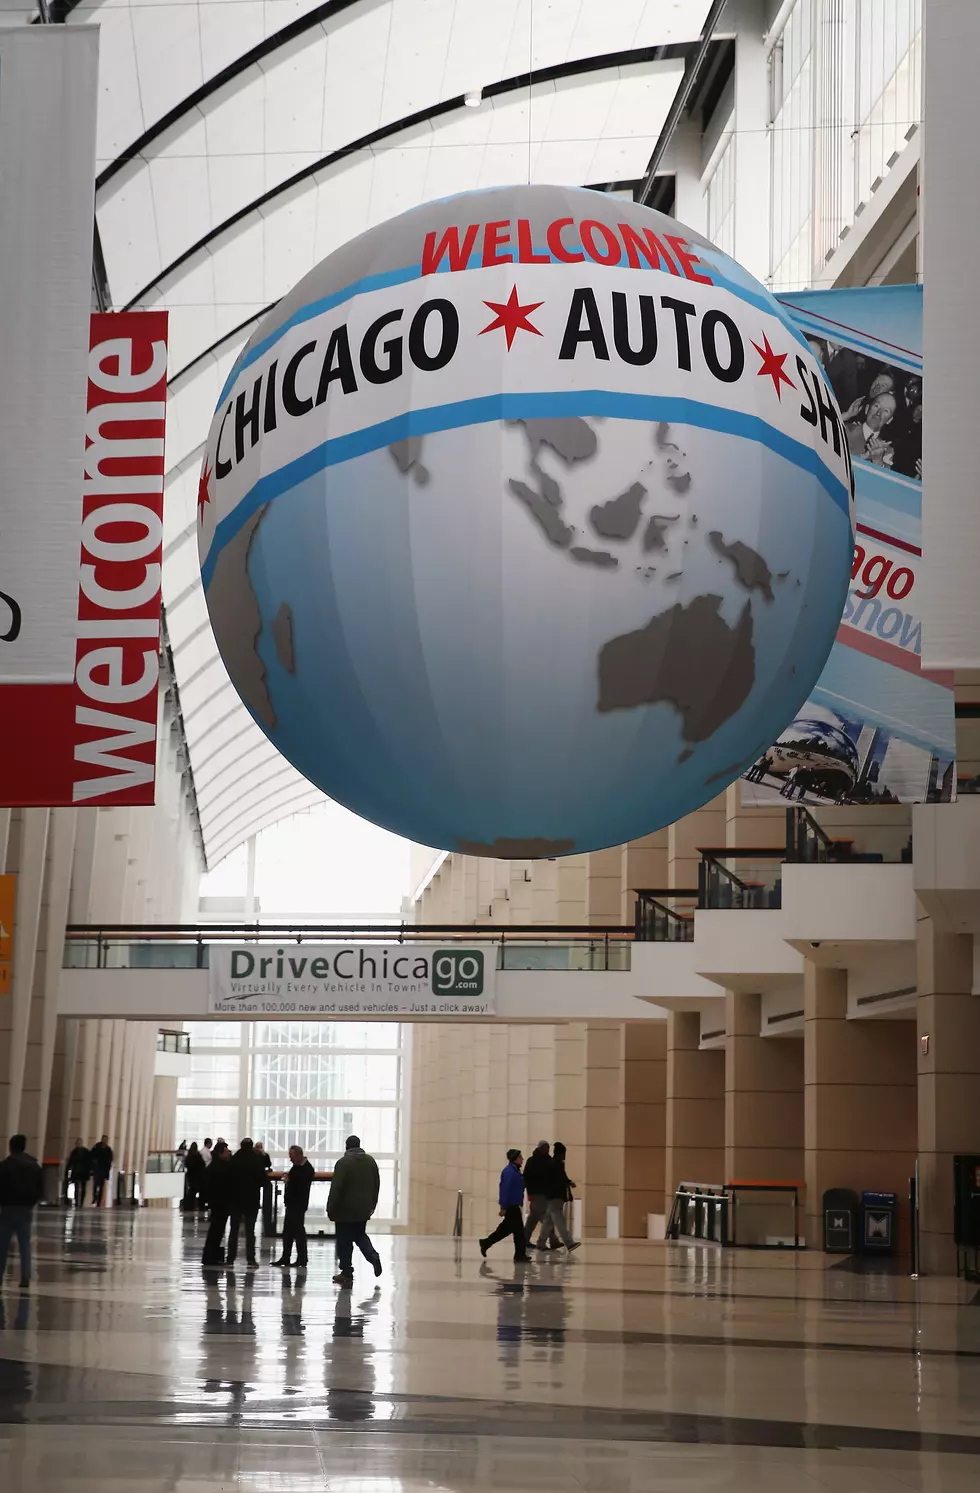 The World’s Largest Auto Show is Now Underway